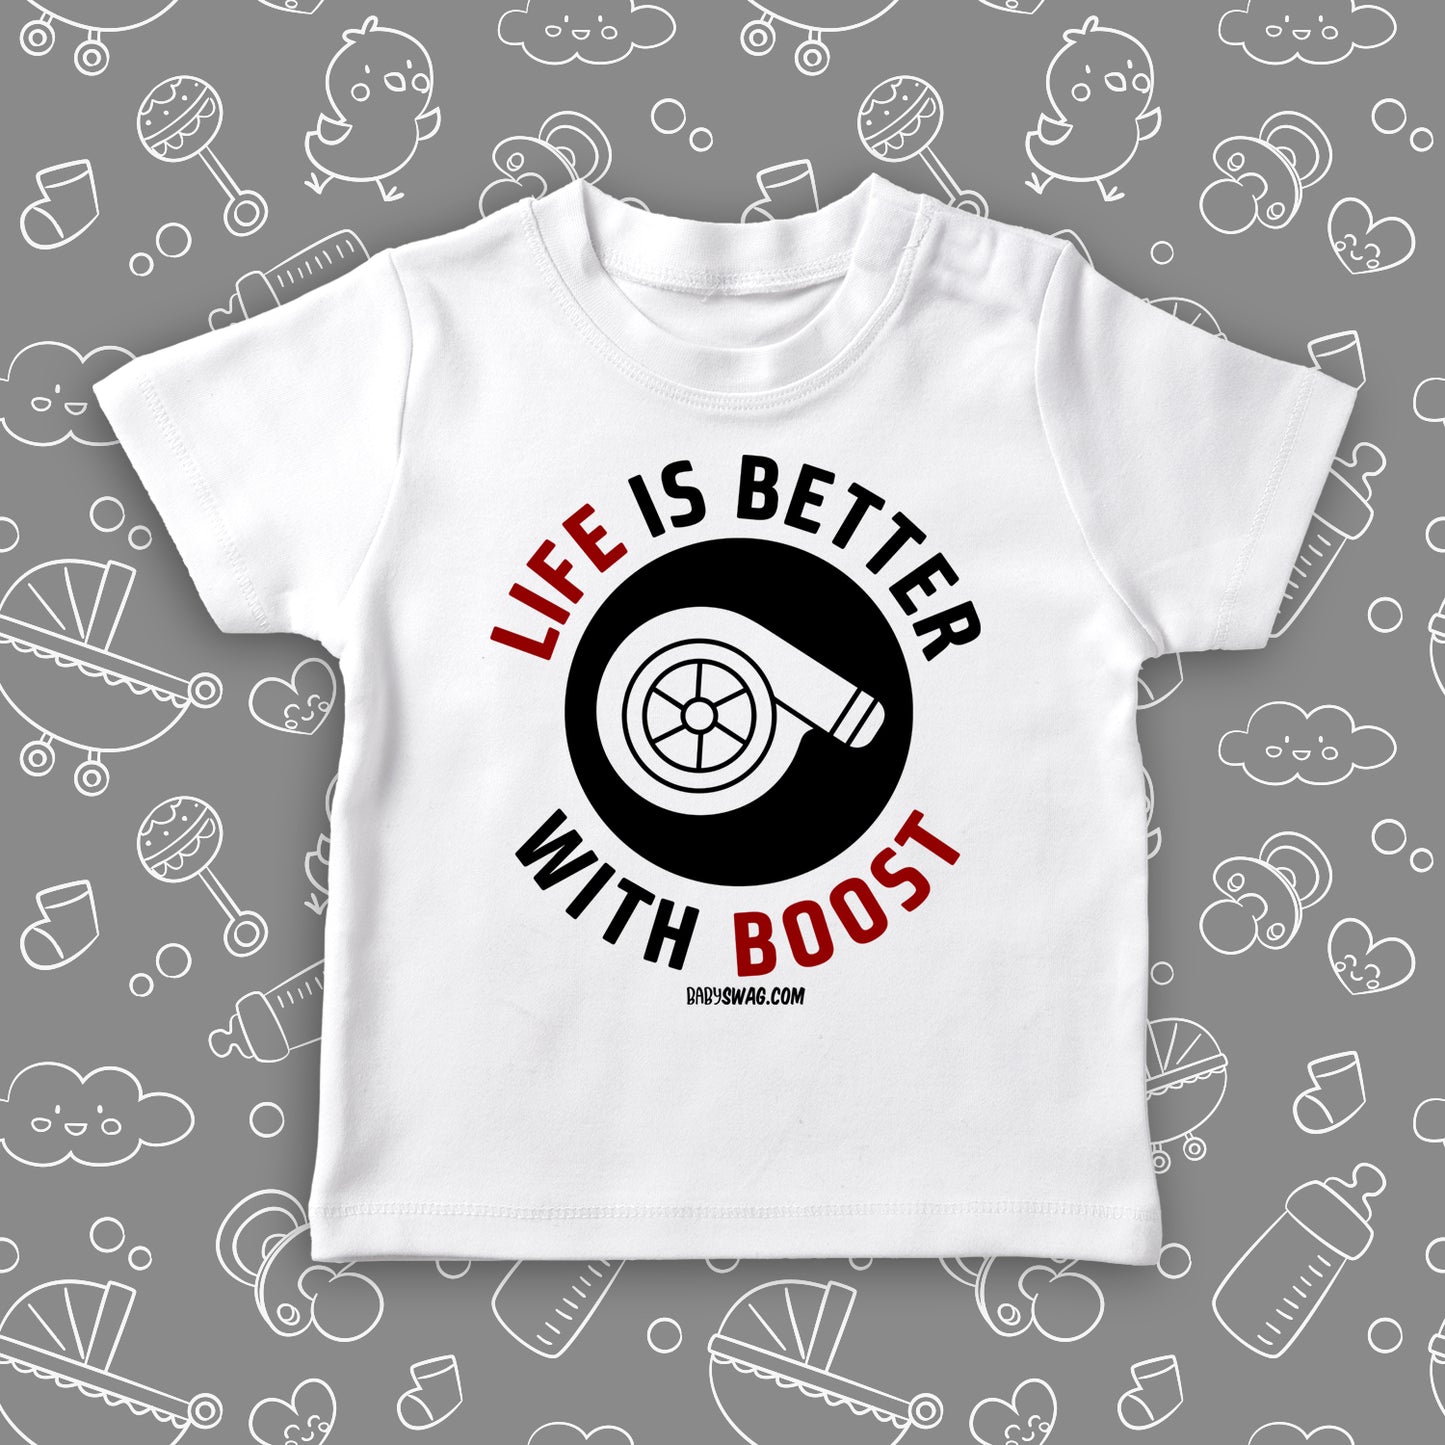 Toddler boy graphic tee with saying "Life Is Better With Boost" in white.